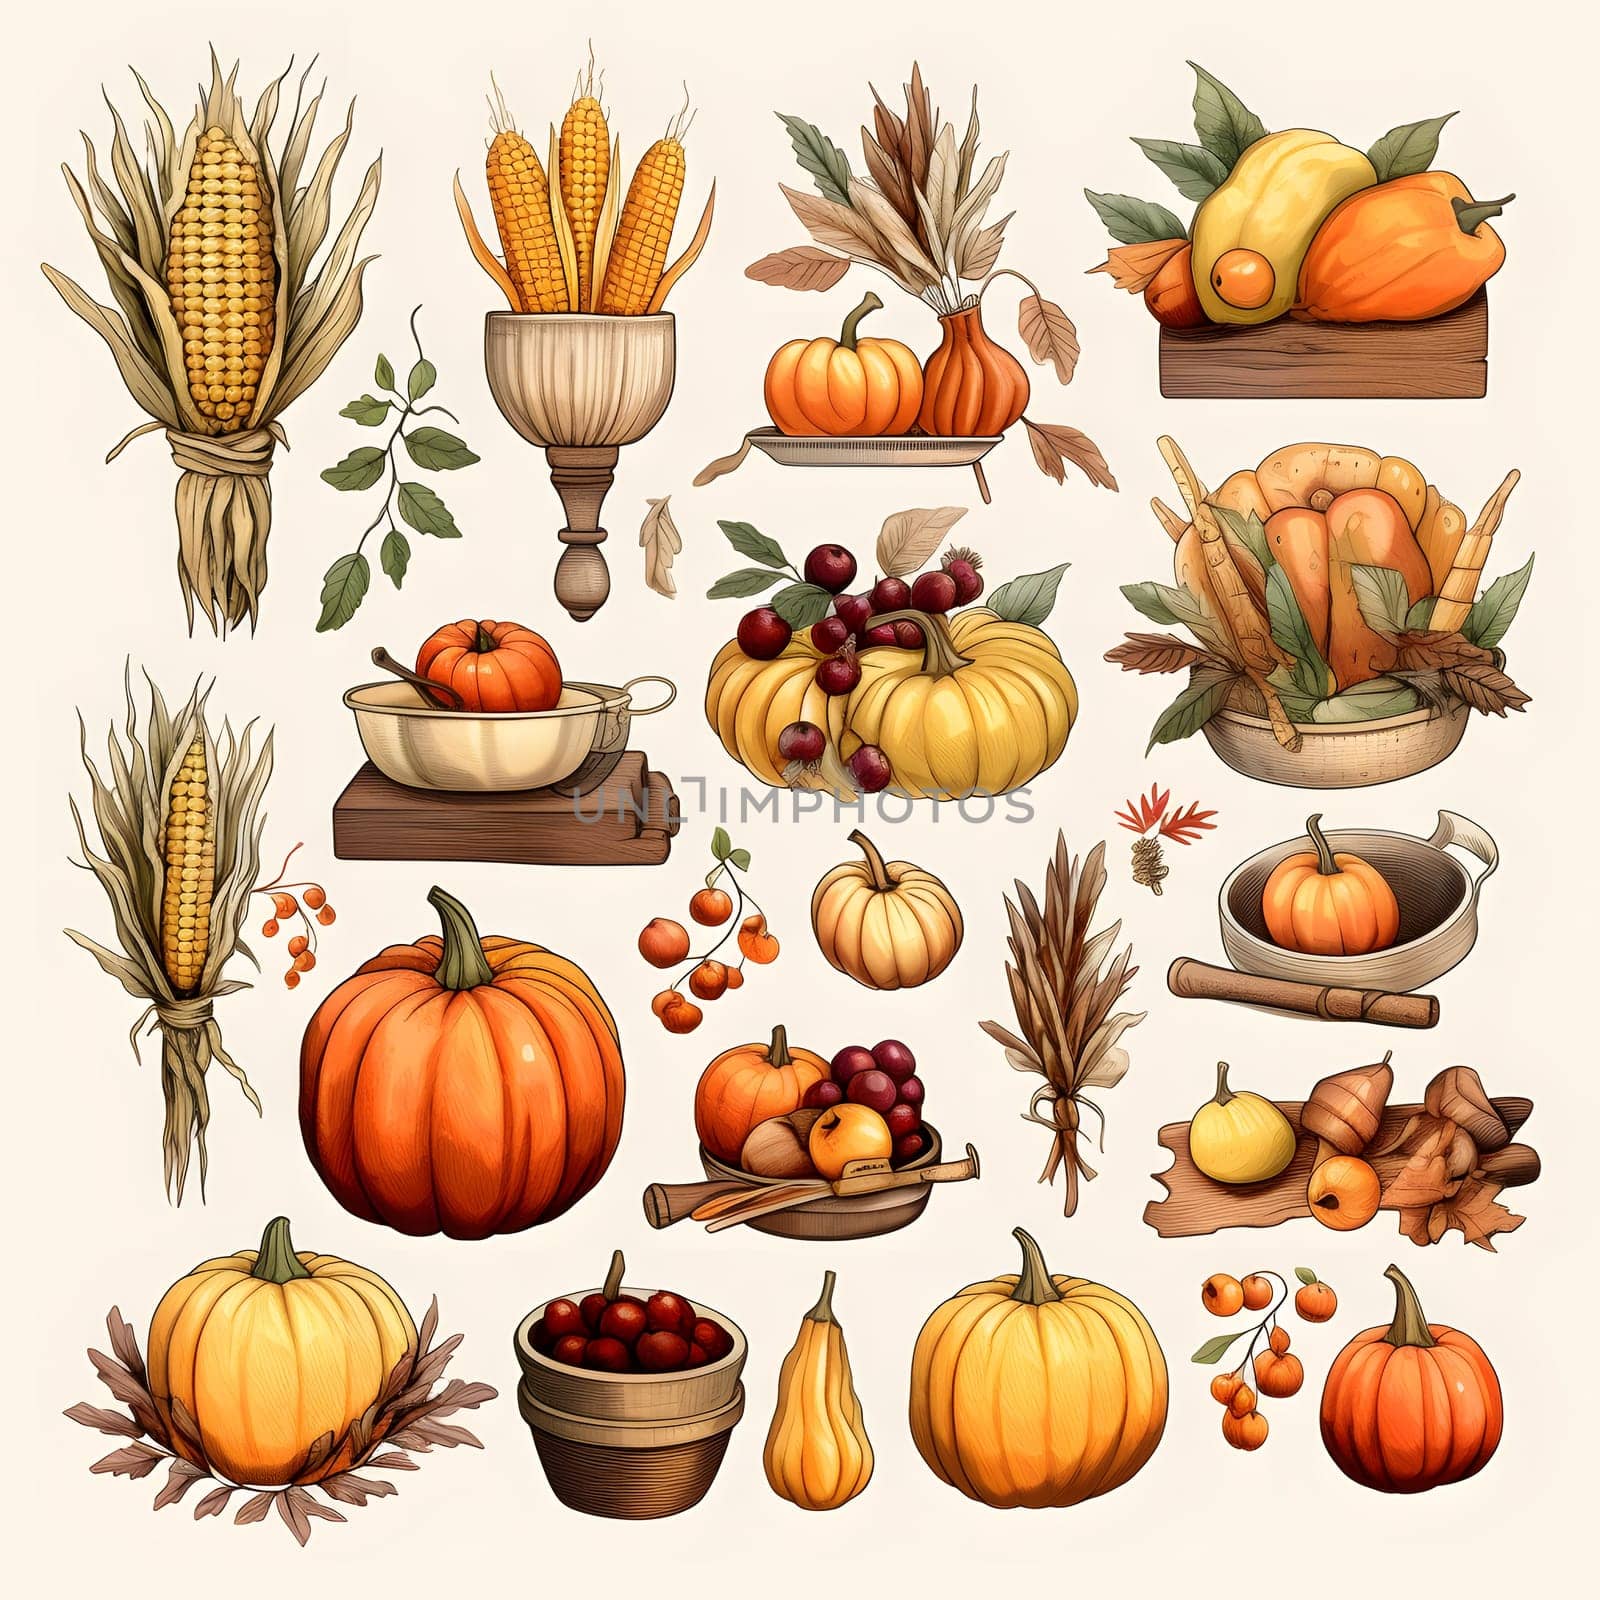 Thanksgiving stickers with cobs, corn, pumpkins, leaves. Corn as a dish of thanksgiving for the harvest, picture on a white isolated background. An atmosphere of joy and celebration.